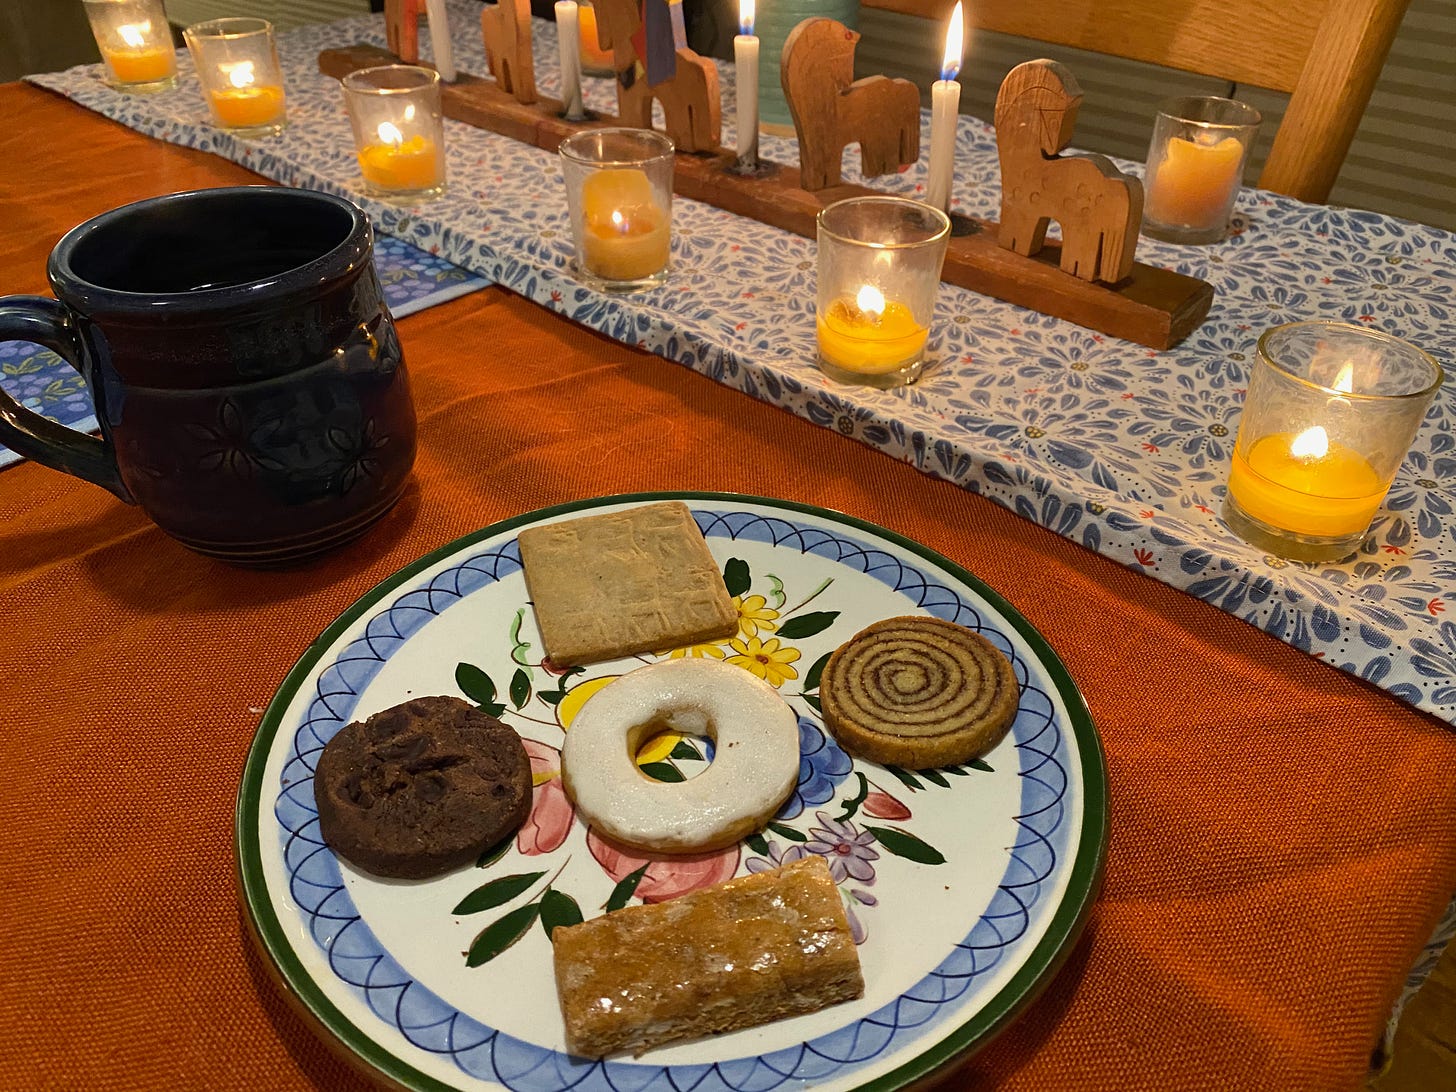 A teatime scene. The table is covered with a red tablecloth. A Swedish advent candle holder is lit, as are several smaller beeswax candles in small glass cups. There is a blue ceramic mug next to a plate that holds five cookies of different shapes and colors.